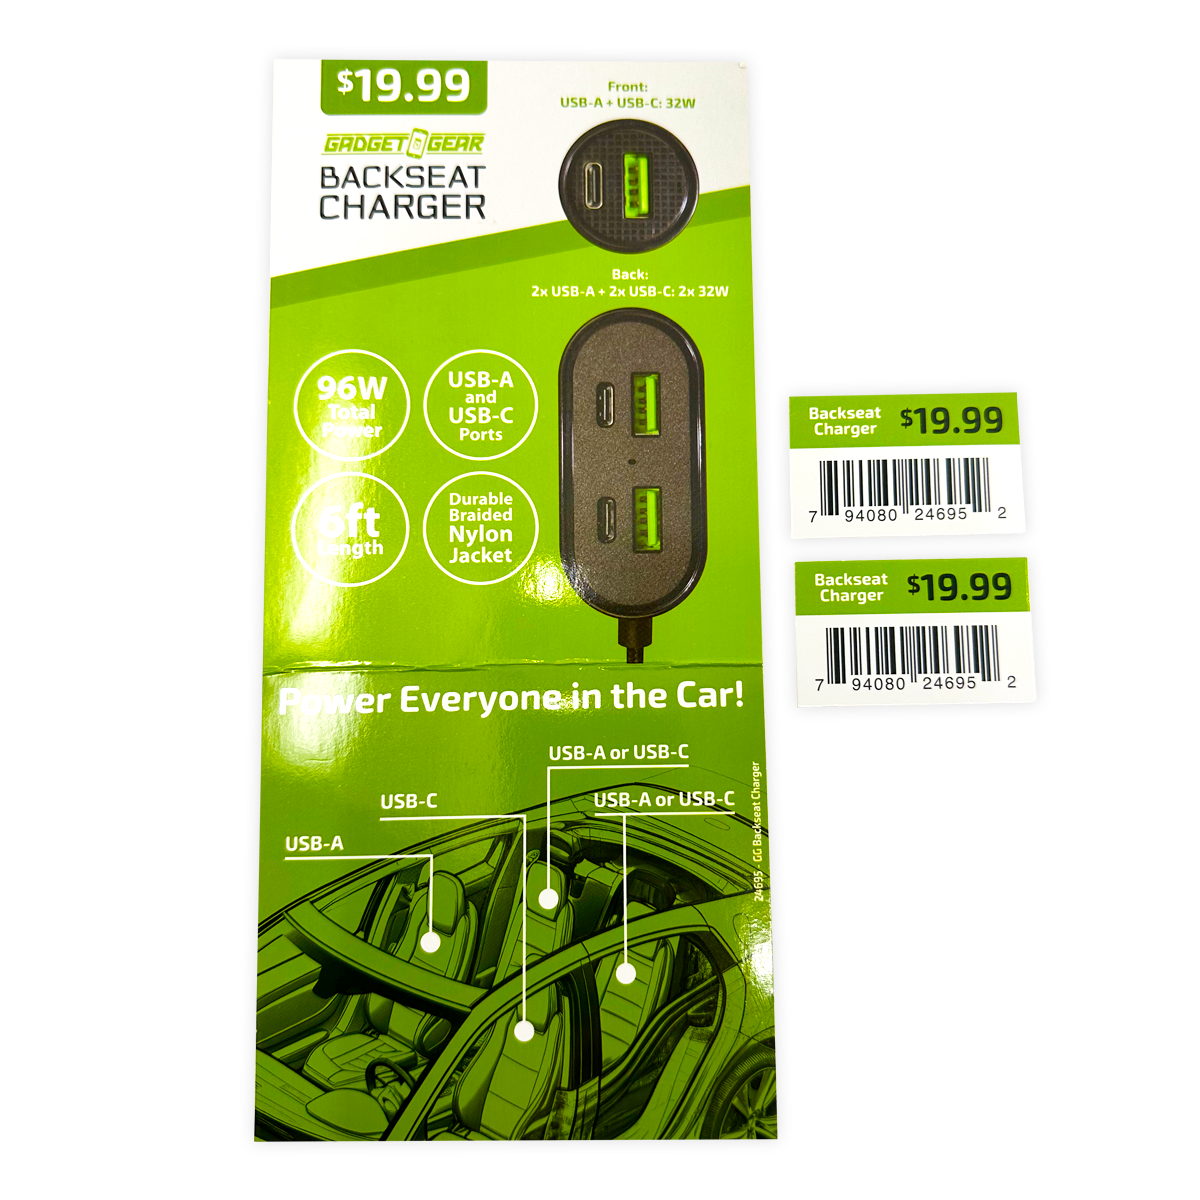 ITEM NUMBER 024695 BACKSEAT CHARGER 6 PIECES PER DISPLAY